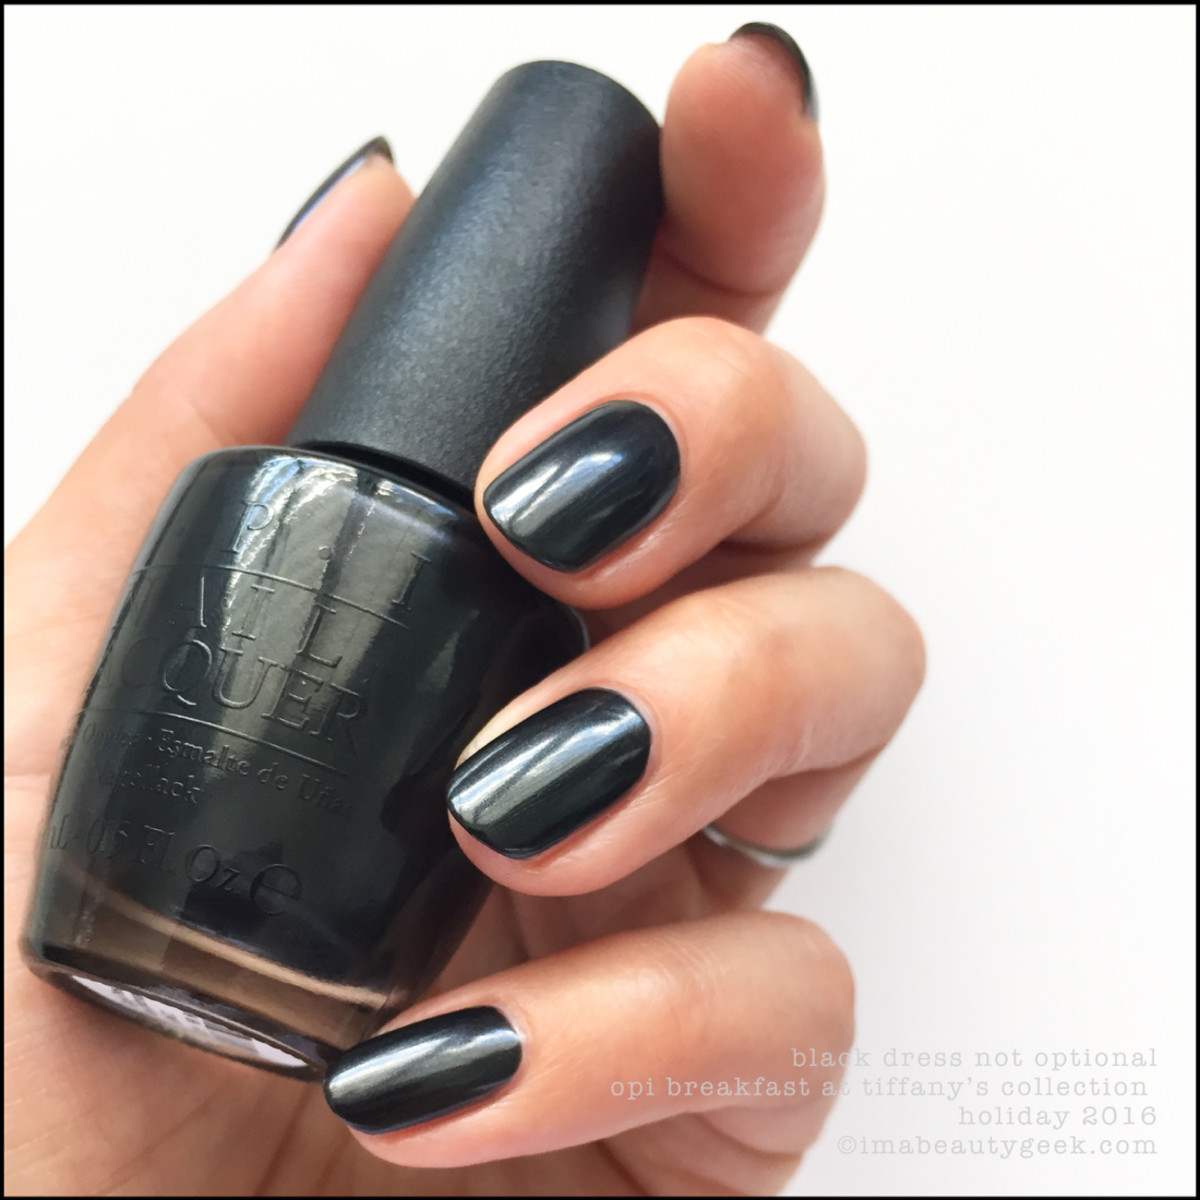 OPI Black Dress Not Optional_OPI Breakfast at Tiffanys Collection Swatches Review Holiday 2016